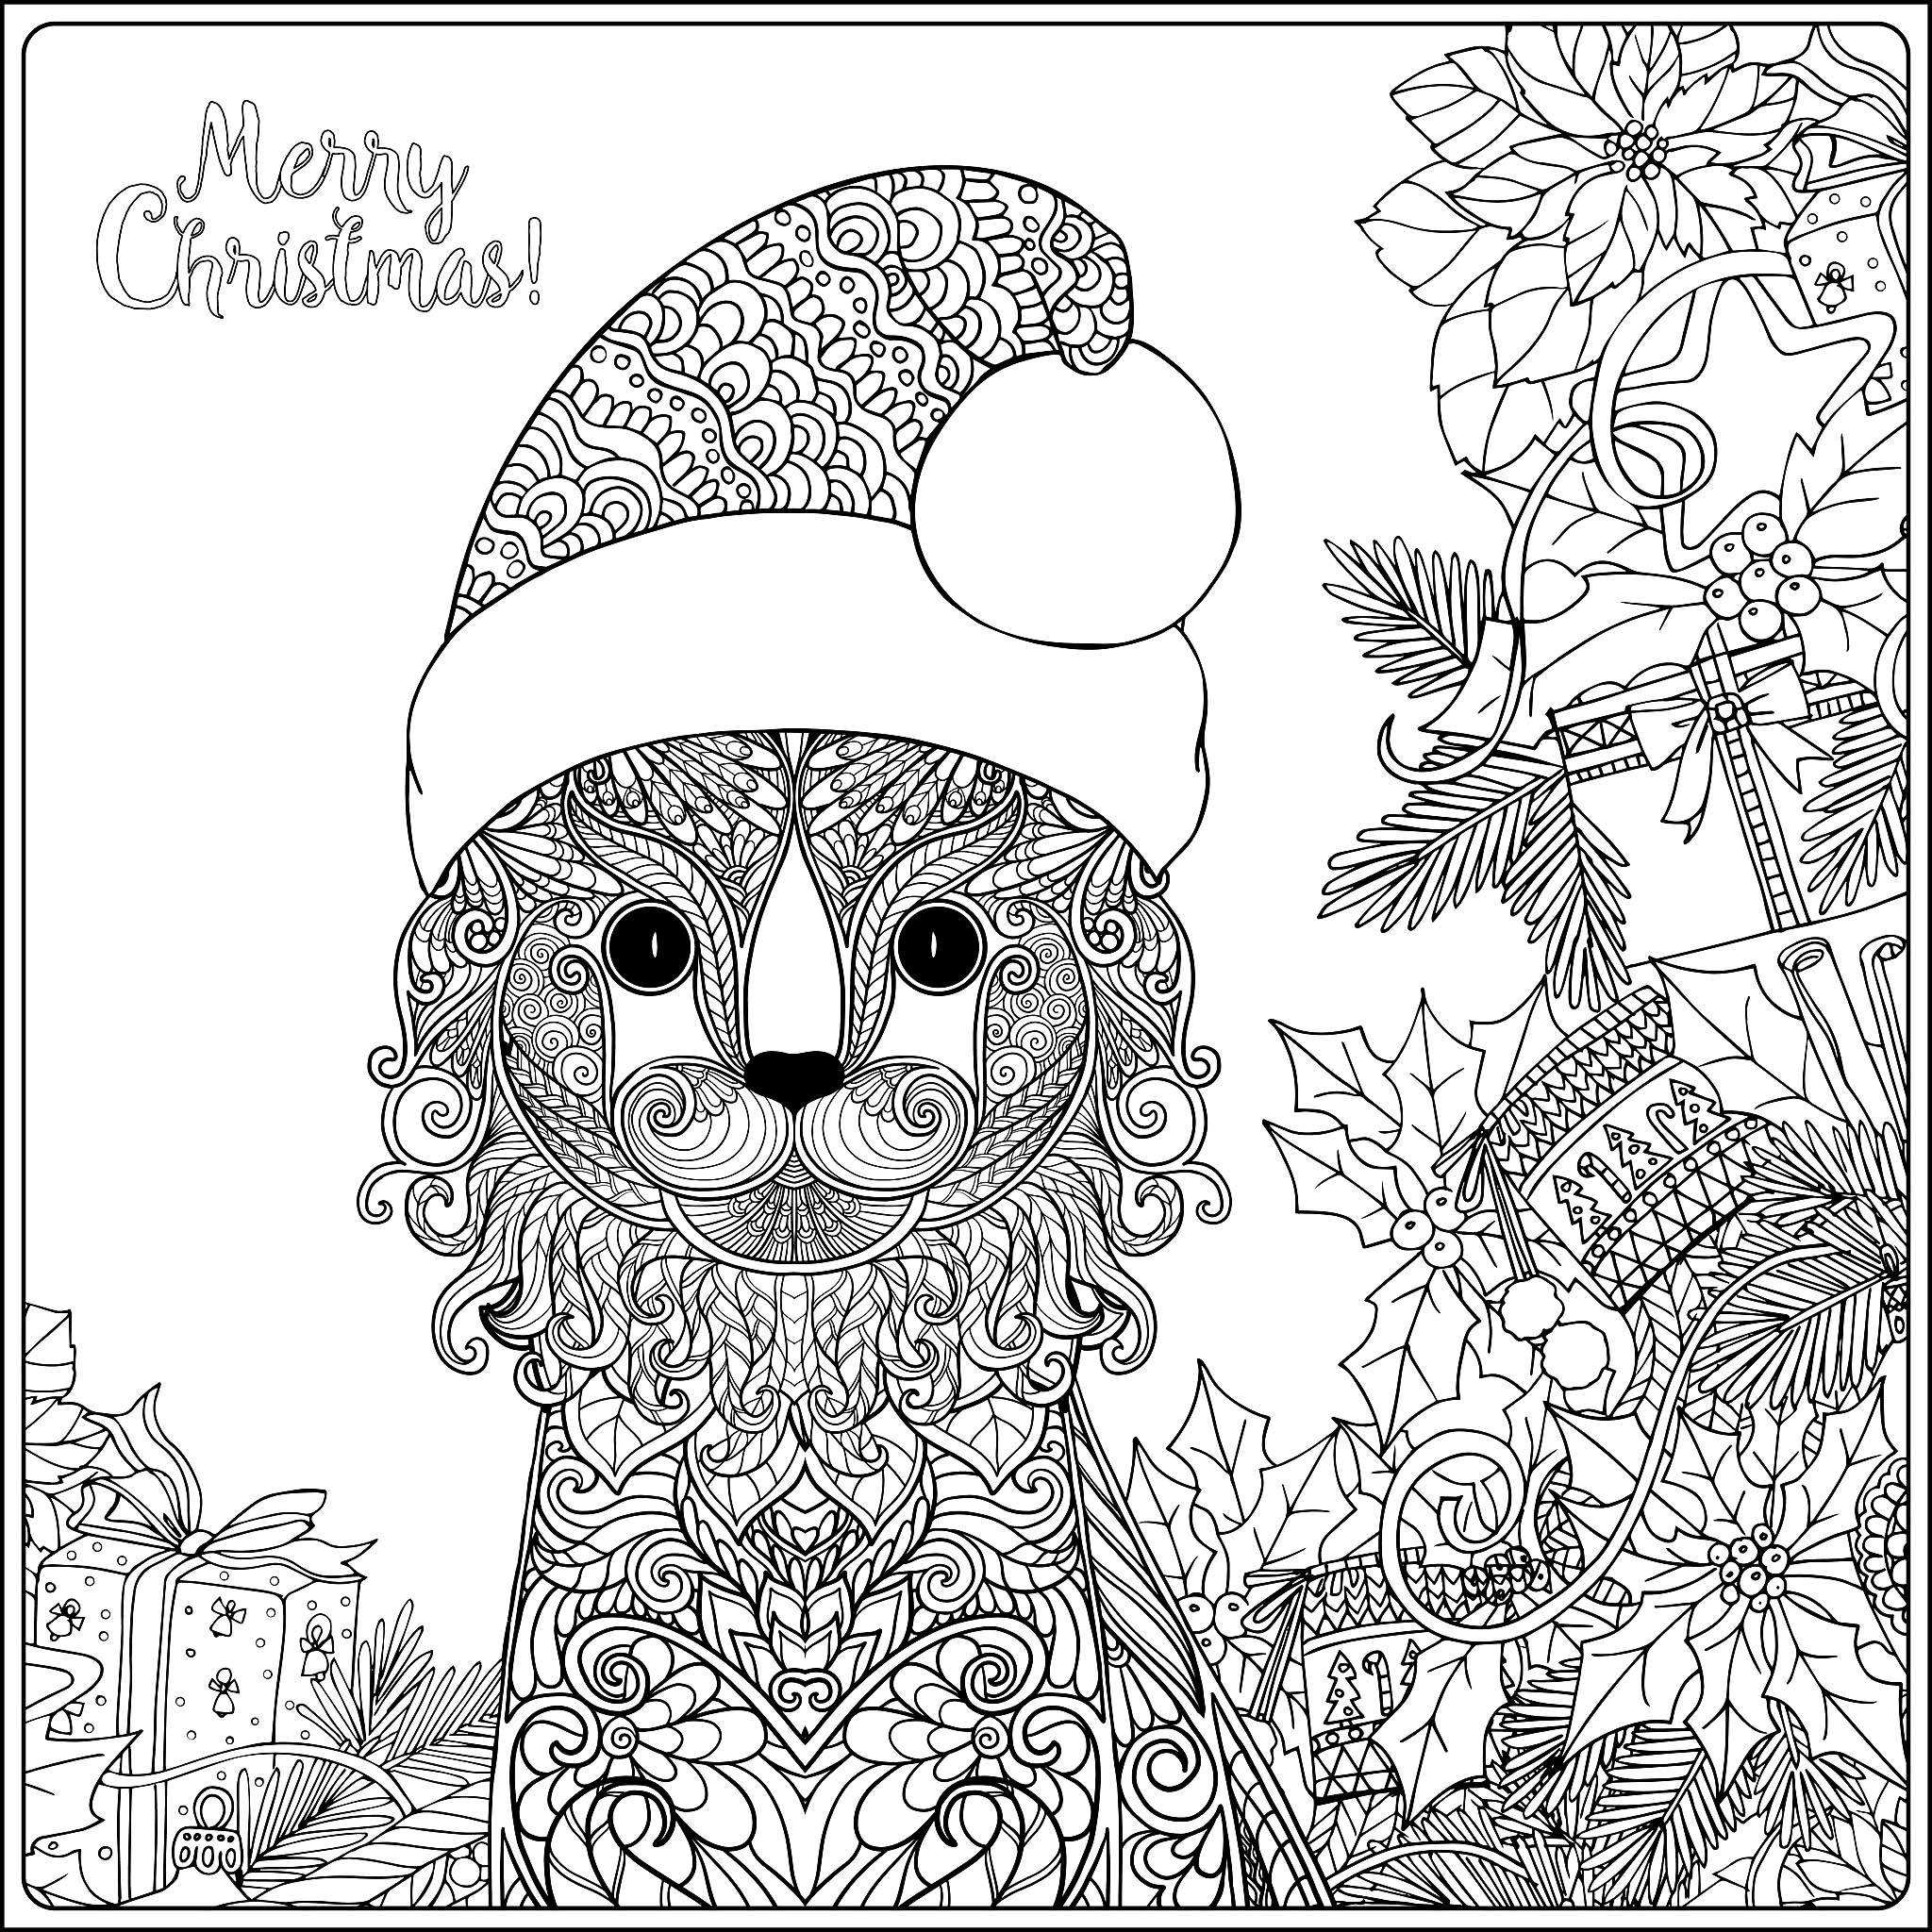 Download Christmas cat with gifts - Christmas Adult Coloring Pages